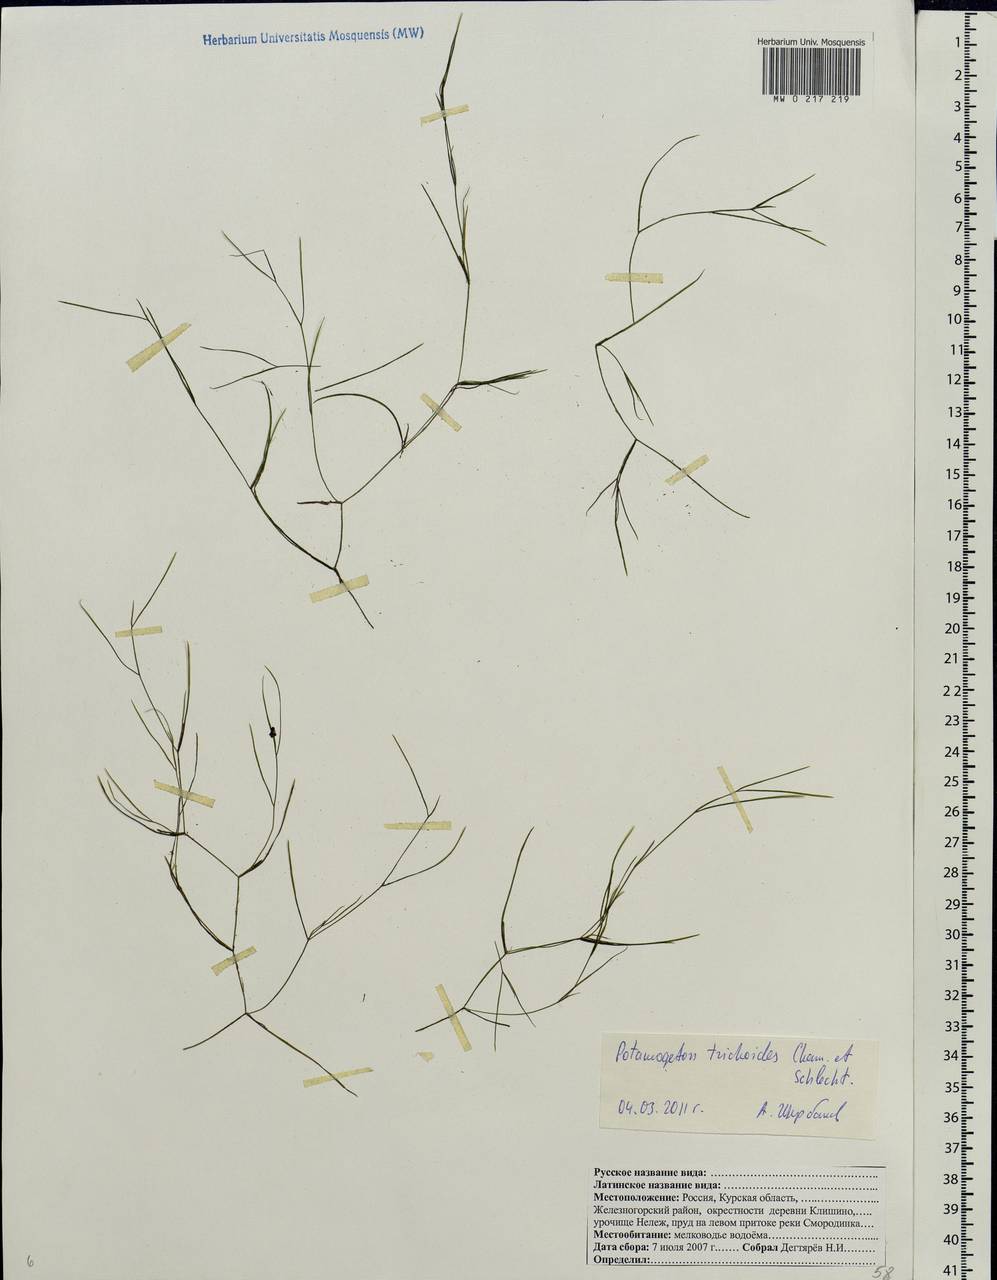 Potamogeton trichoides Cham. & Schltdl., Eastern Europe, Central forest-and-steppe region (E6) (Russia)